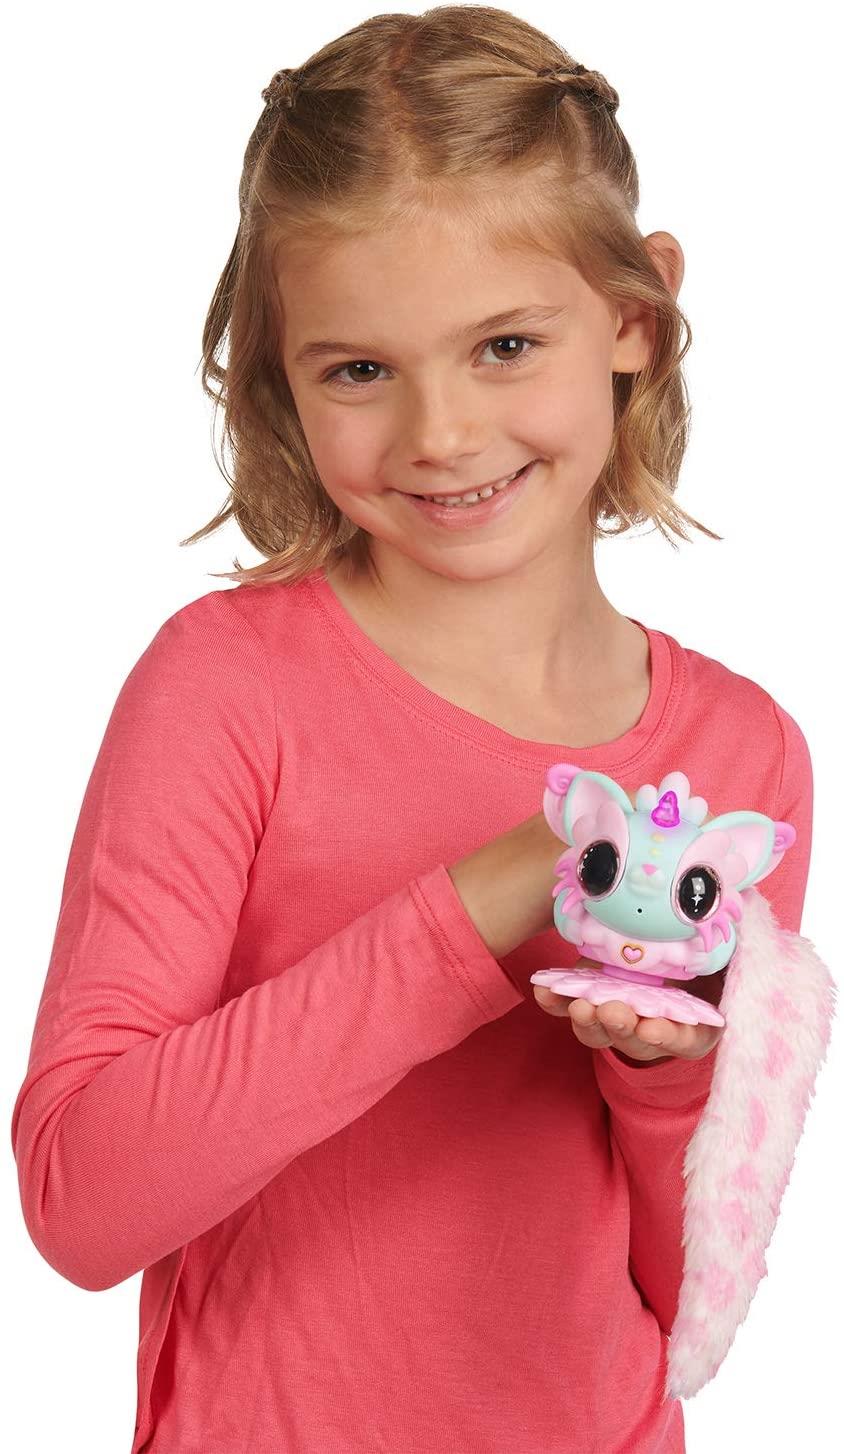 ROSIE Pixie Belles Interactive Enchanted Animal Toy WowWee